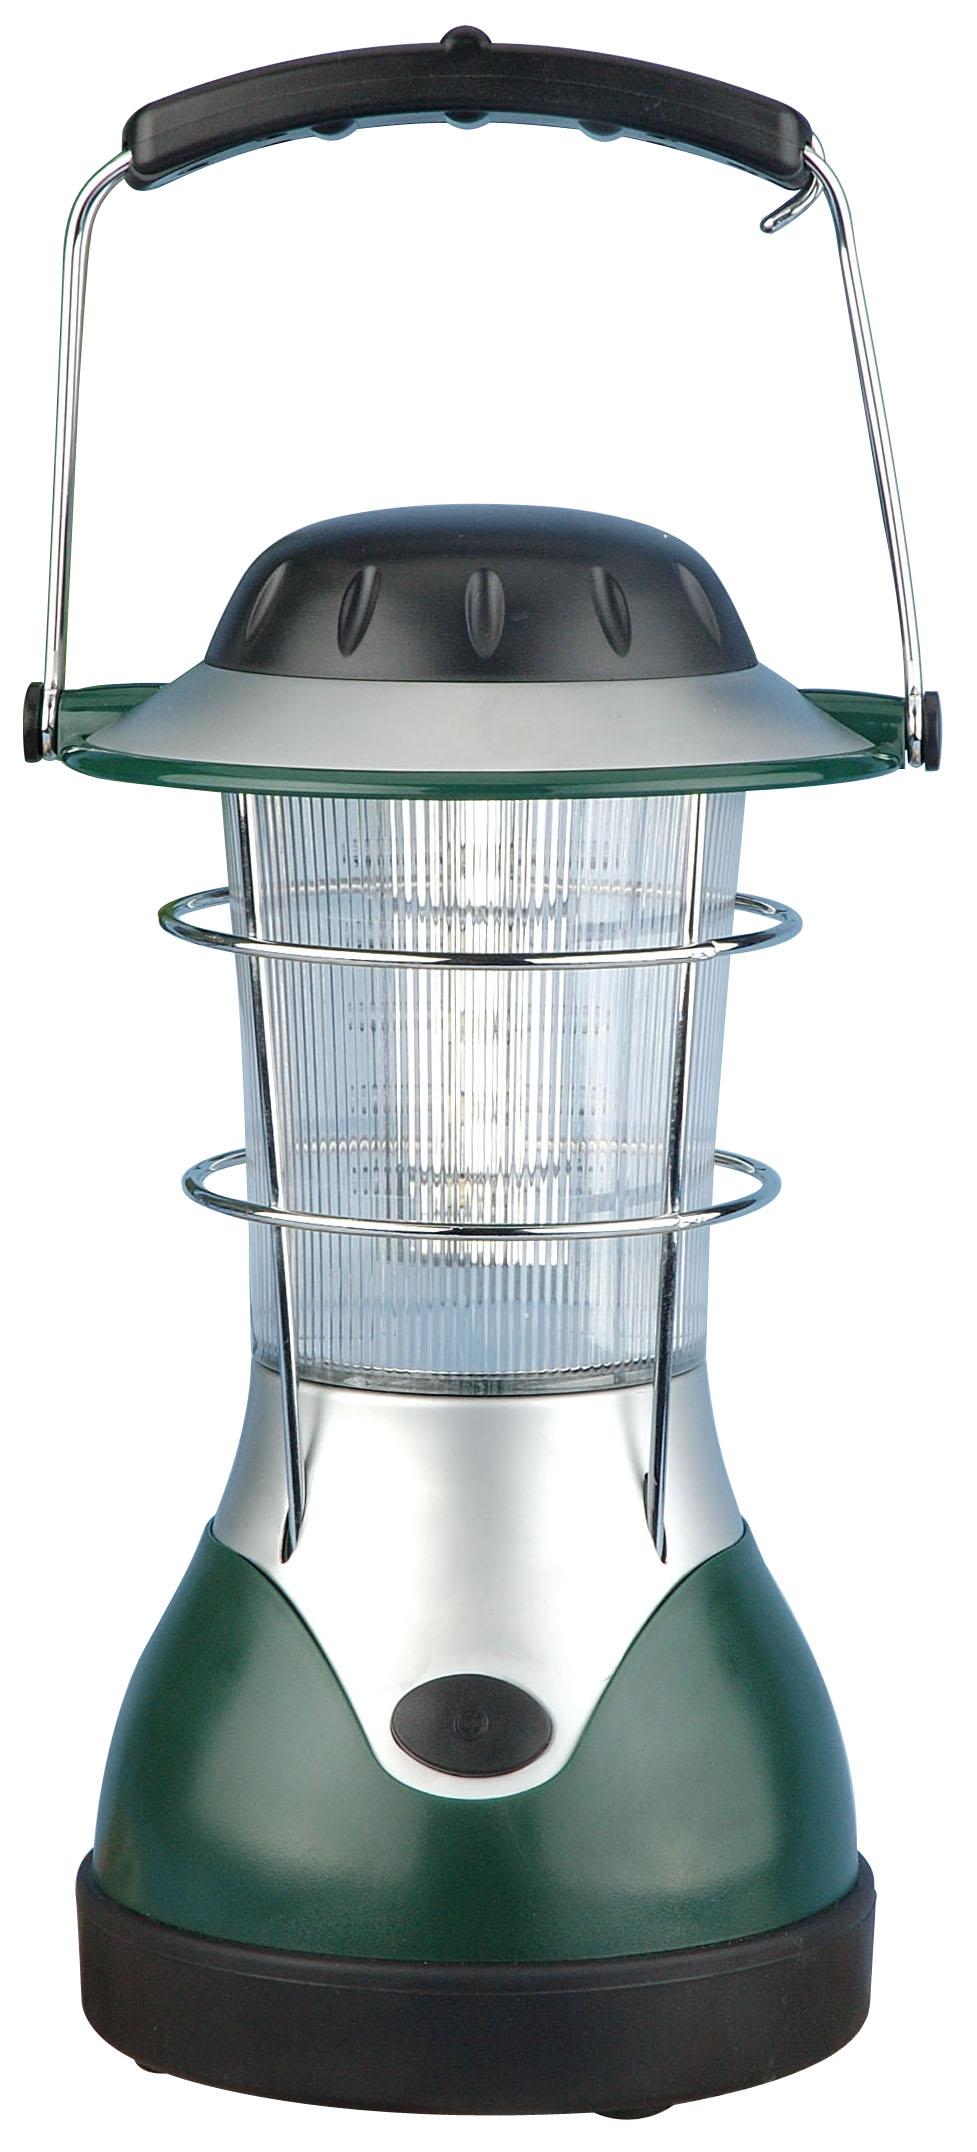 24 LED SOLAR CAMPING LANTERN OWNER S MANUAL WARNING: Read carefully and understand all INSTRUCTIONS before operating.